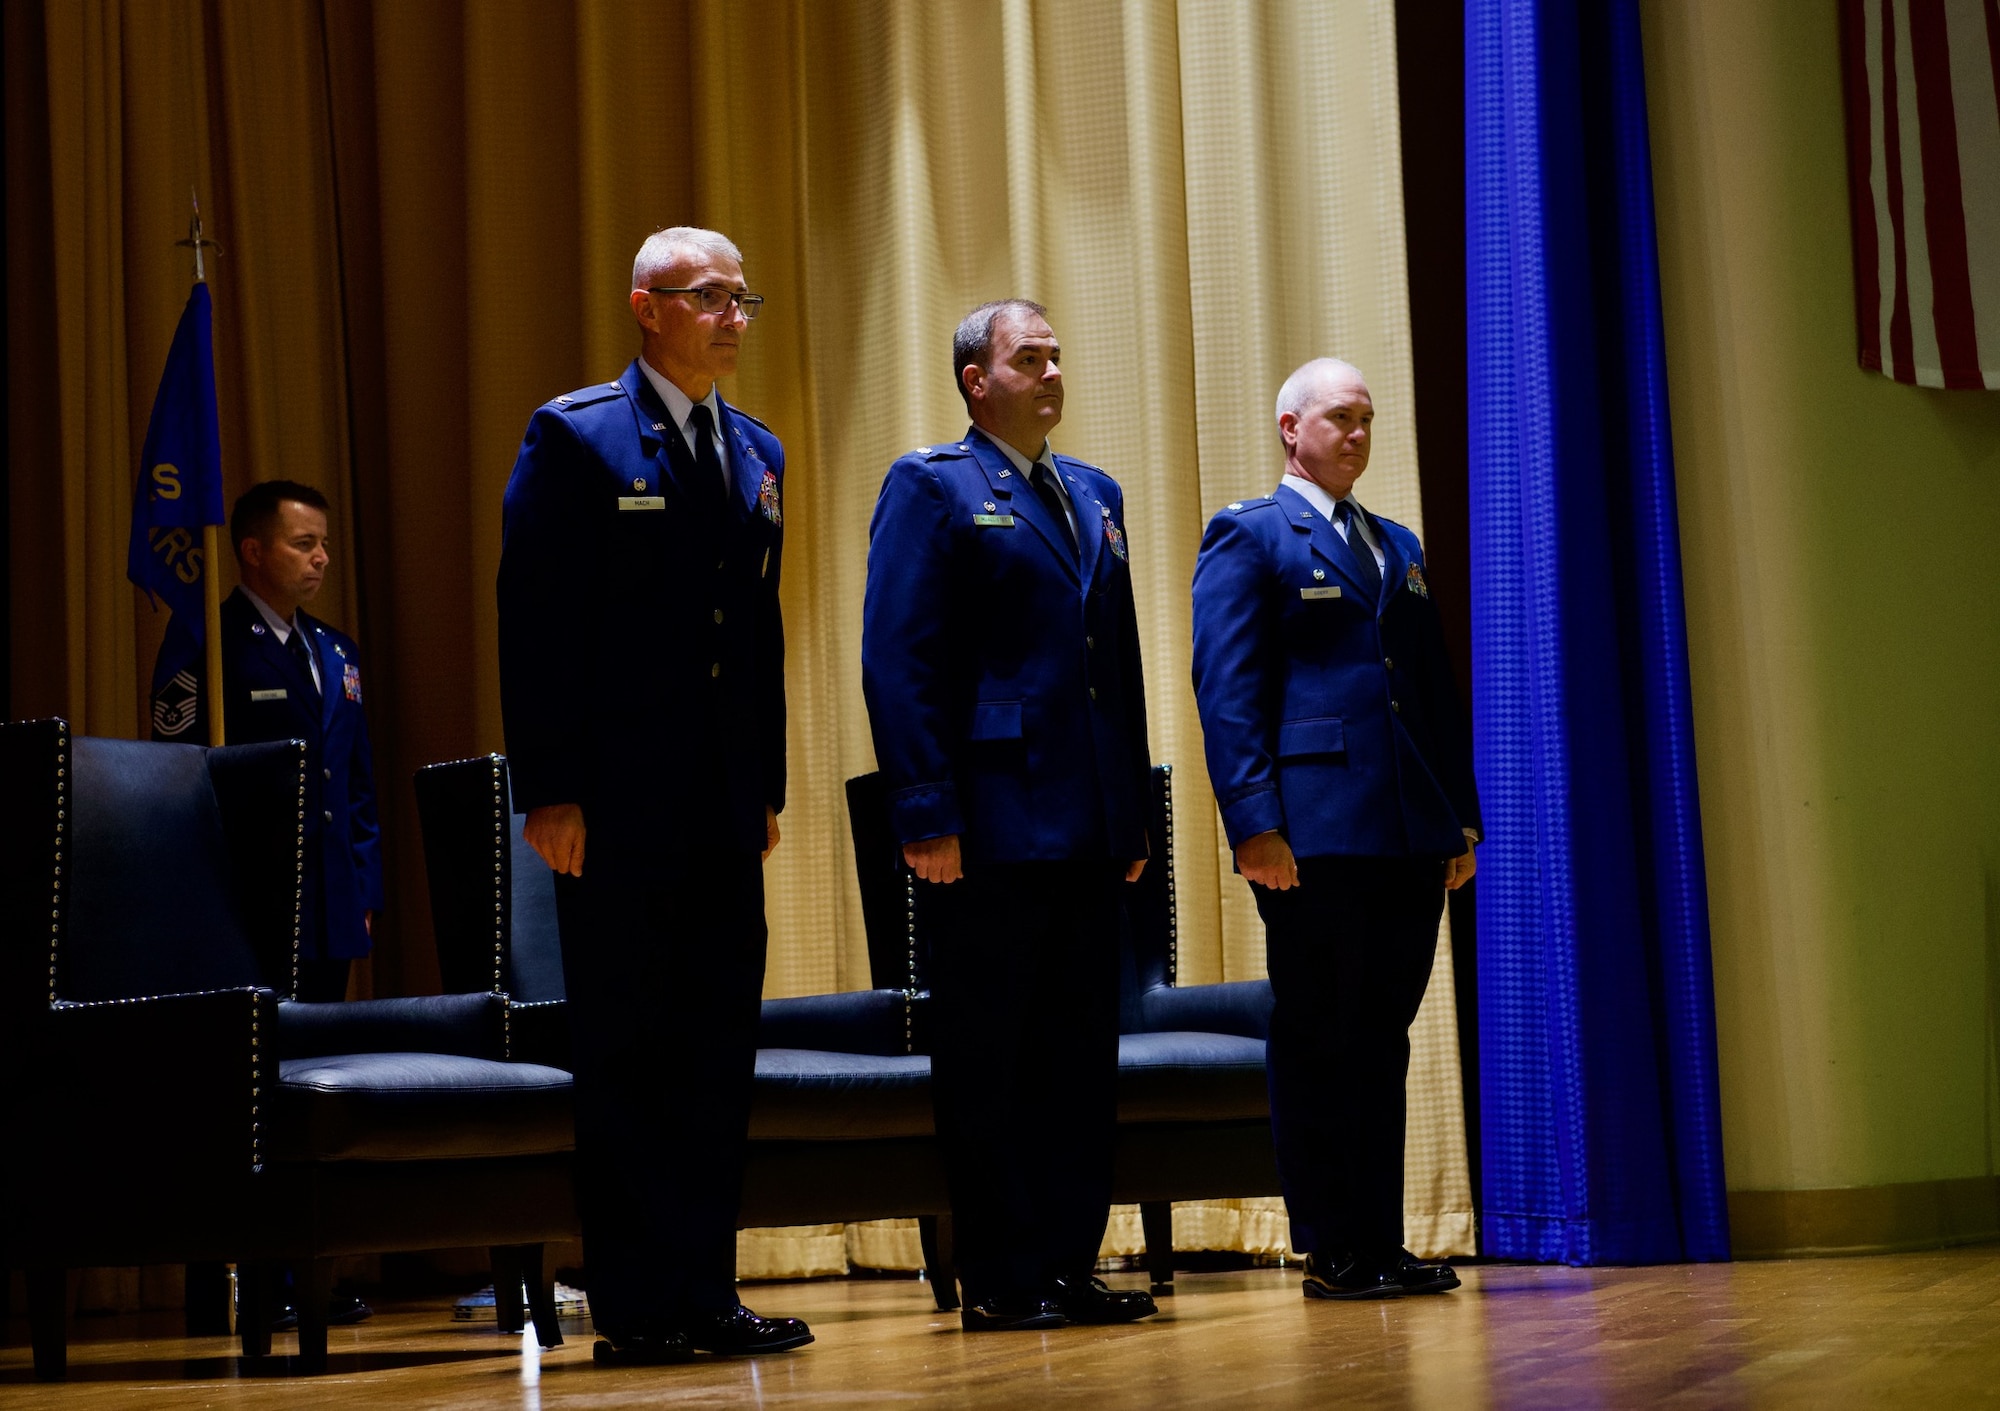 Col. James Mach, 927th Operations Group commander, Lt. Col. Marc McAllister, and Lt. Col. Andrew Doerr, 63rd Air Refueling Squadron commander, stand at attention during a change of command ceremony on MacDill Air Force Base, Fla., April 30, 2022.